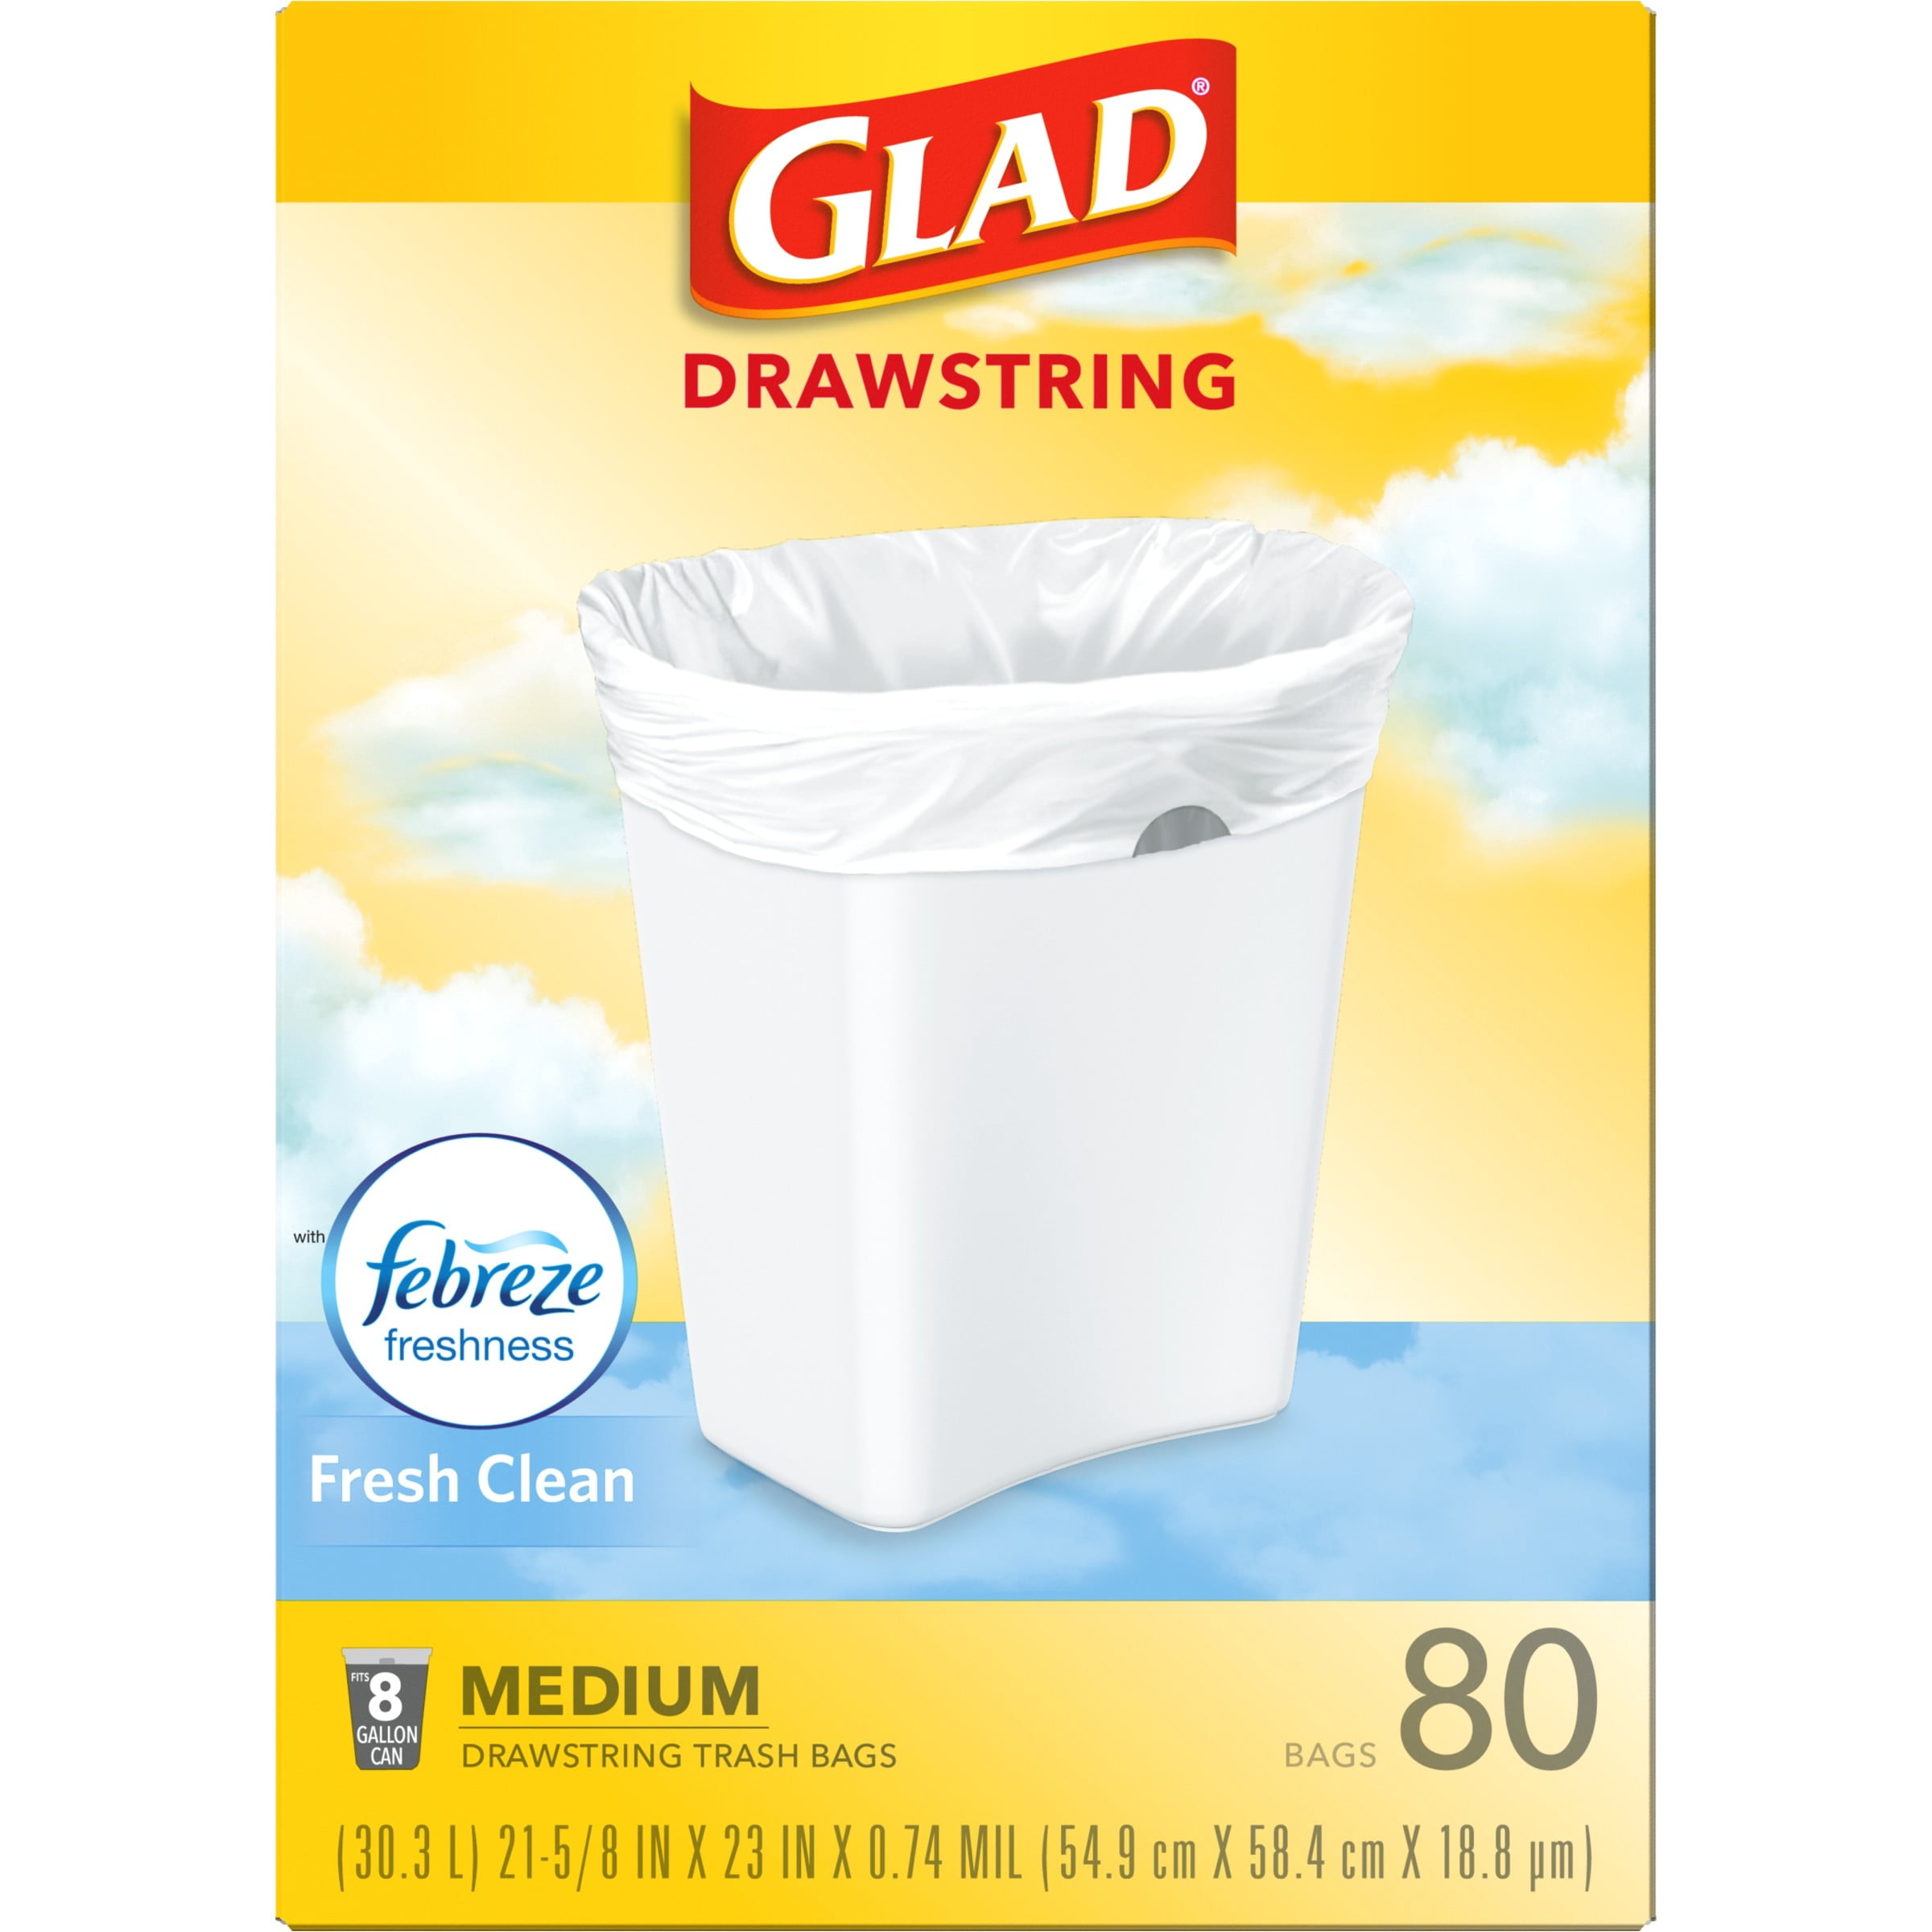 Plasticplace 6 Gallon Trash Bags 0.7 Mil White Drawstring Garbage Can Liners 17 inch x 20 inch (100 Count)